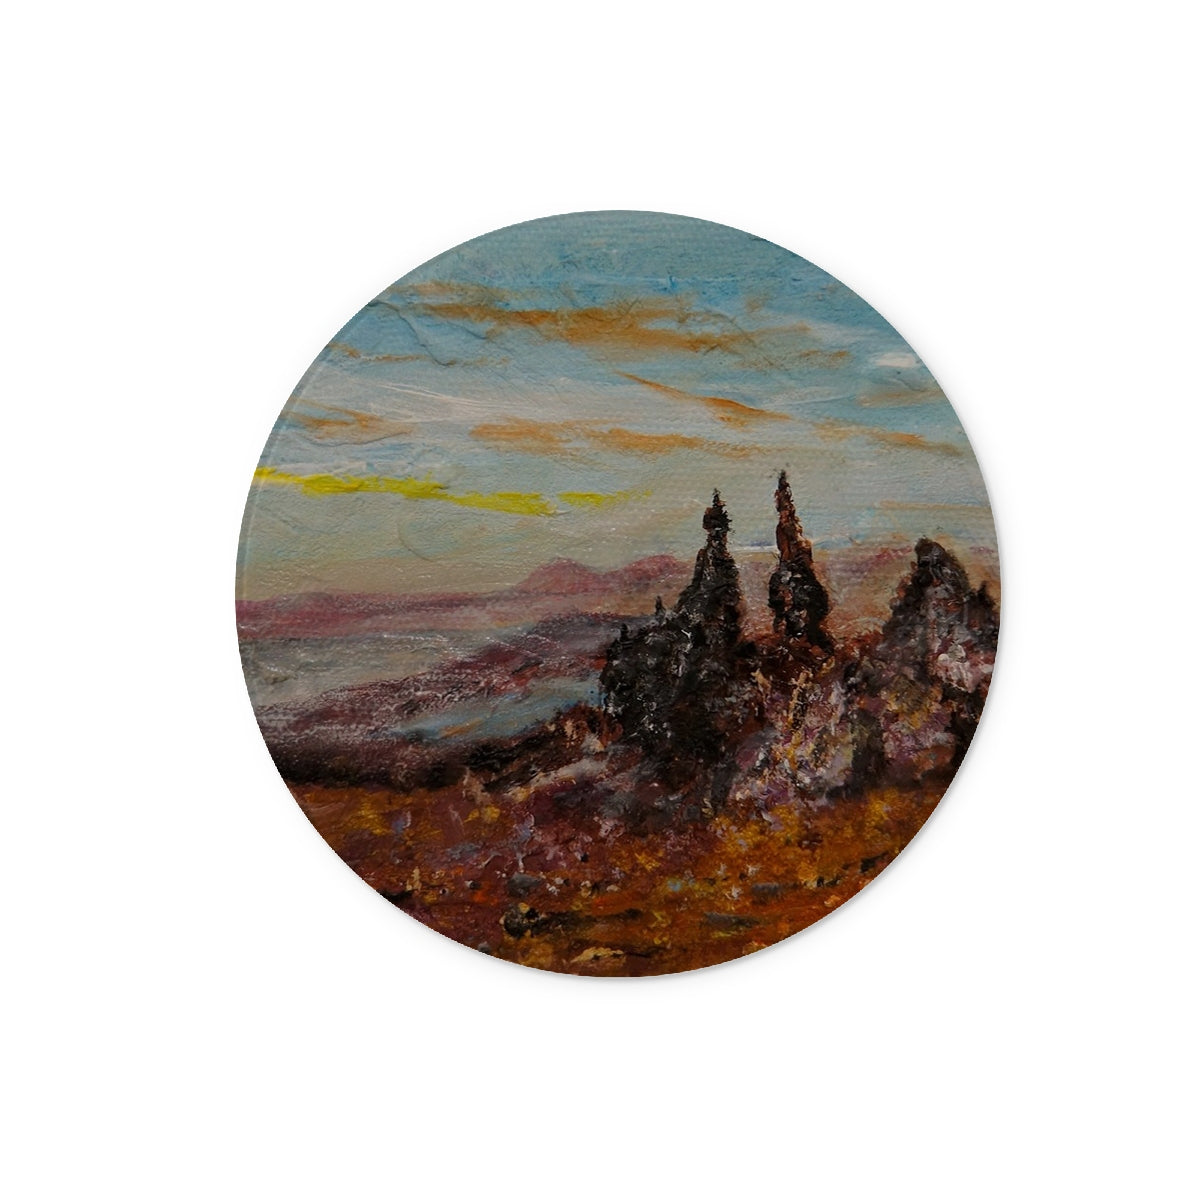 The Old Man Of Storr Skye Art Gifts Glass Chopping Board-Glass Chopping Boards-Skye Art Gallery-12" Round-Paintings, Prints, Homeware, Art Gifts From Scotland By Scottish Artist Kevin Hunter